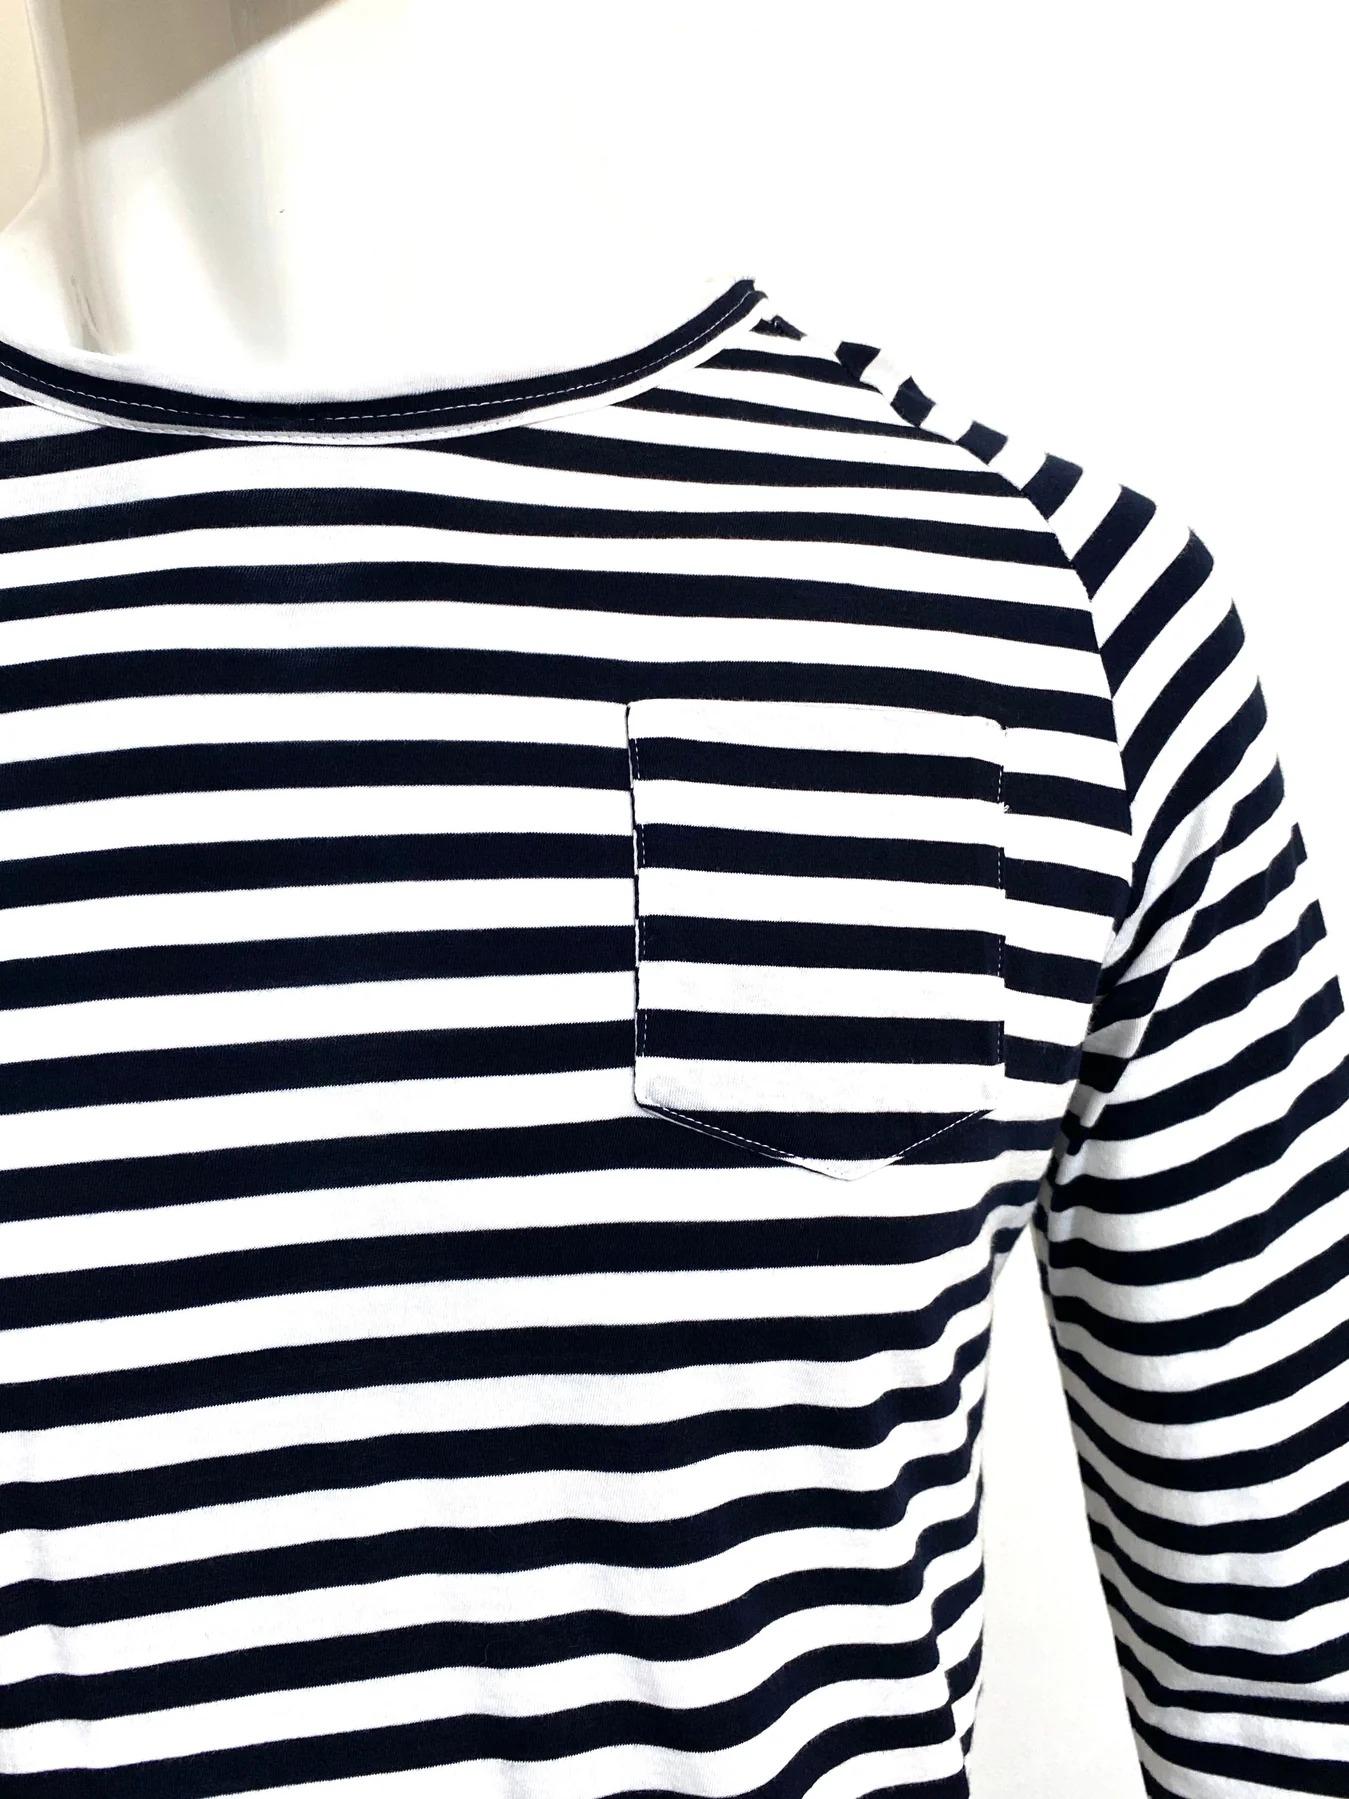 Lardini Cotton Top

Striped in blue and white with grey contrasting feature hem and cuffs. Chest pocket. Long sleeves and round neck.

Additional information:
Composition - 100% Cotton 
Size – XS
Condition – Very Good